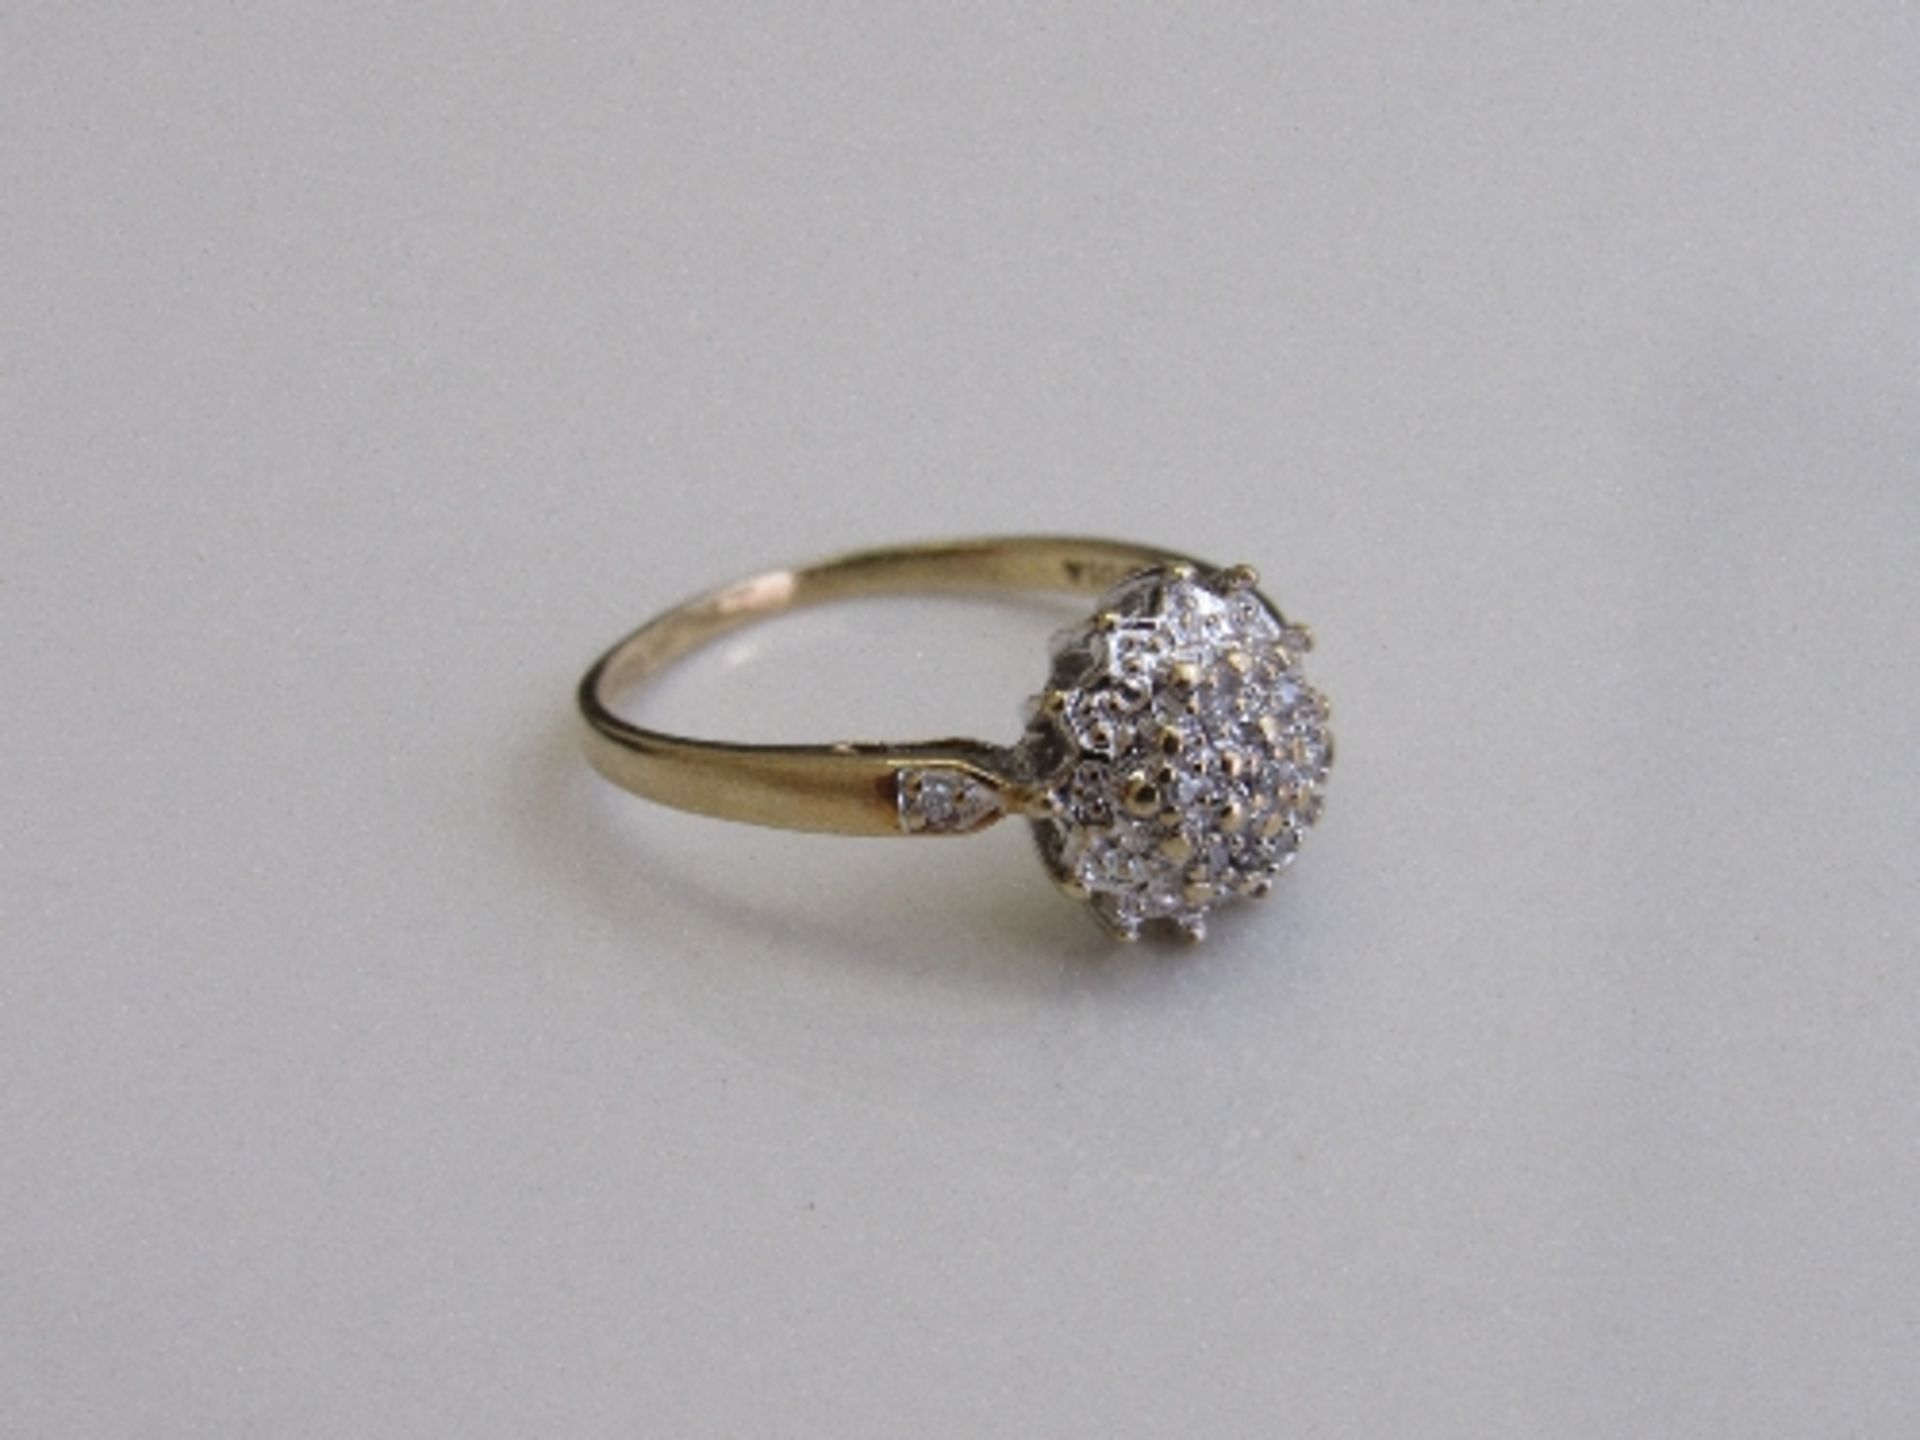 9ct gold & diamond cluster ring, size Q, weight 2.3gms. Estimate £80-100.